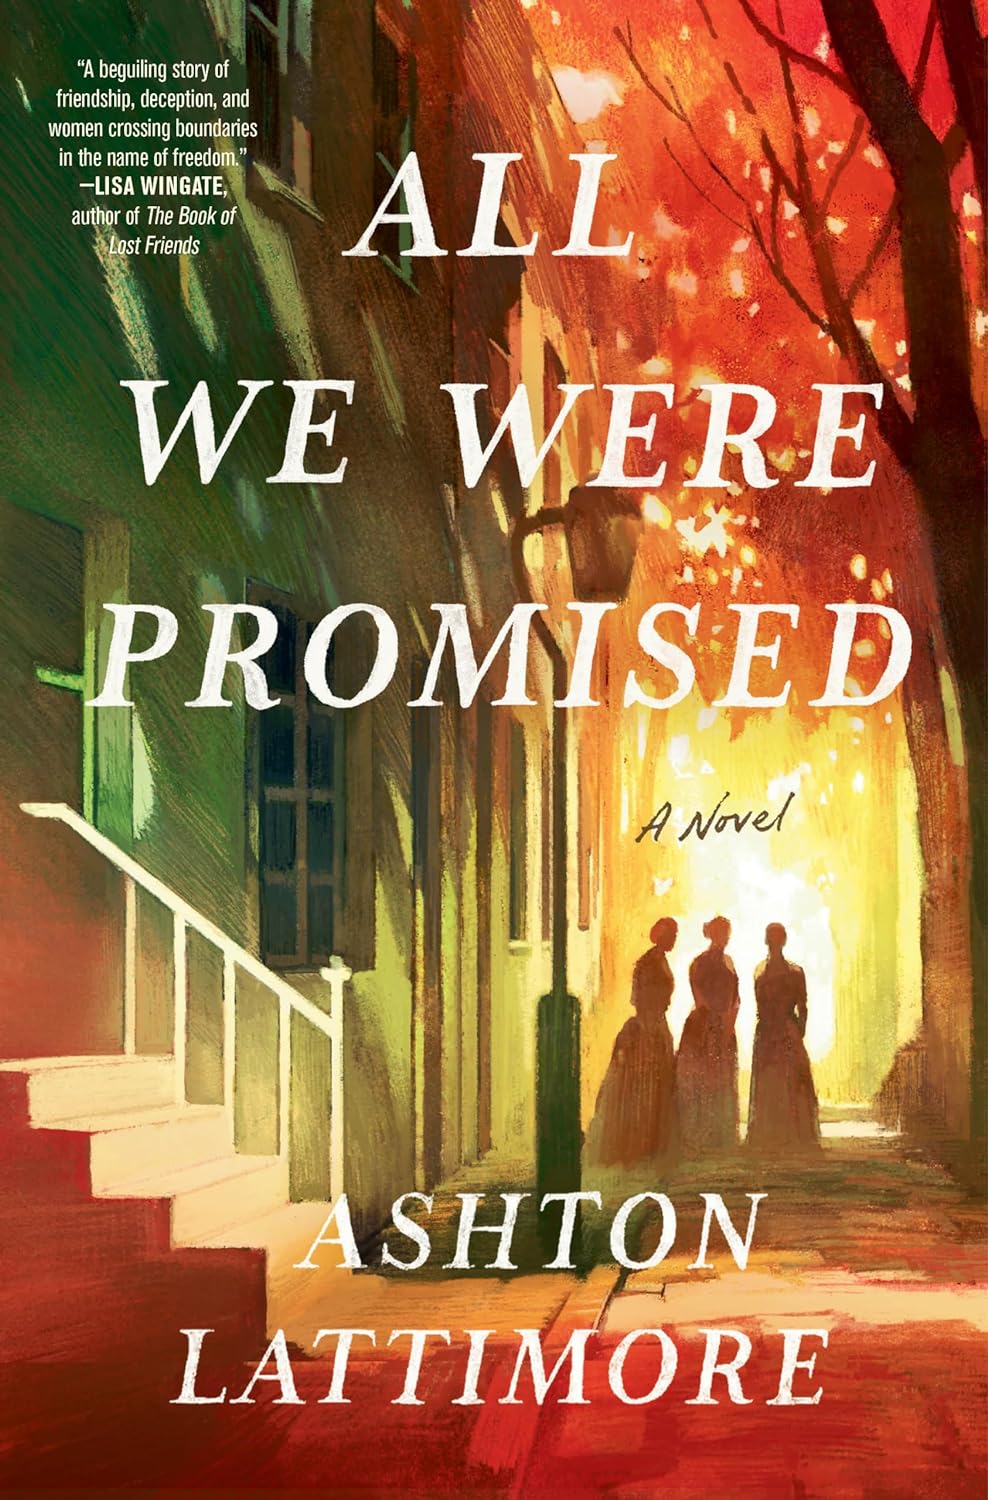 Image for "All We Were Promised"